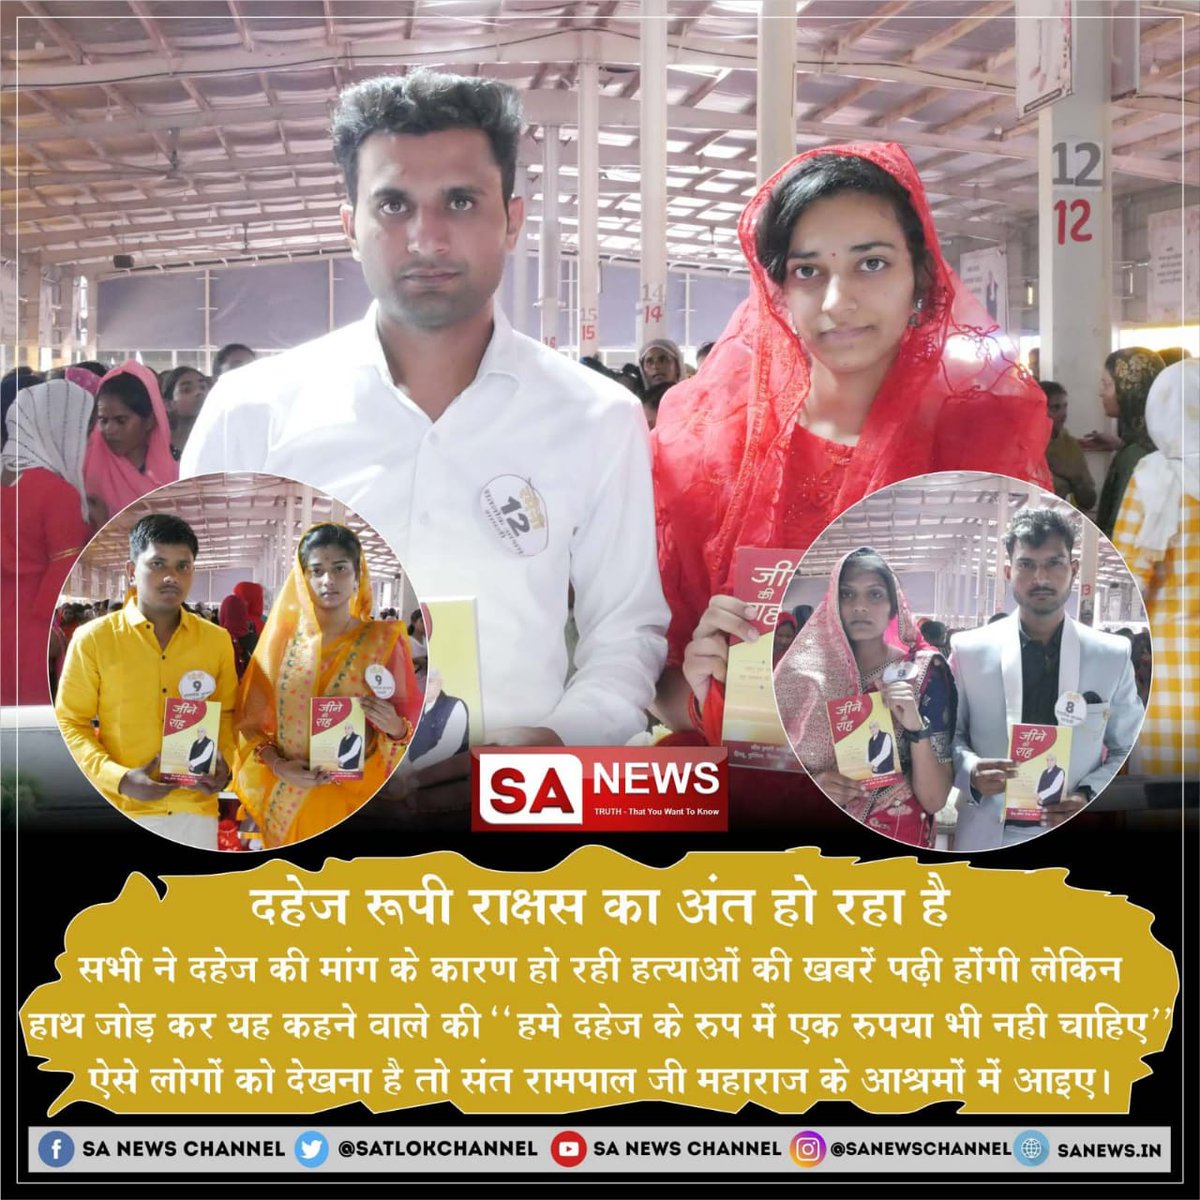 #दहेज_मुक्त_विवाह
Do you know?
Sant Rampal Ji Maharaj is showing the method of earning virtues by which a devotee will automatically get benefits so one will not take dowry.

Marriage In 17 Minutes